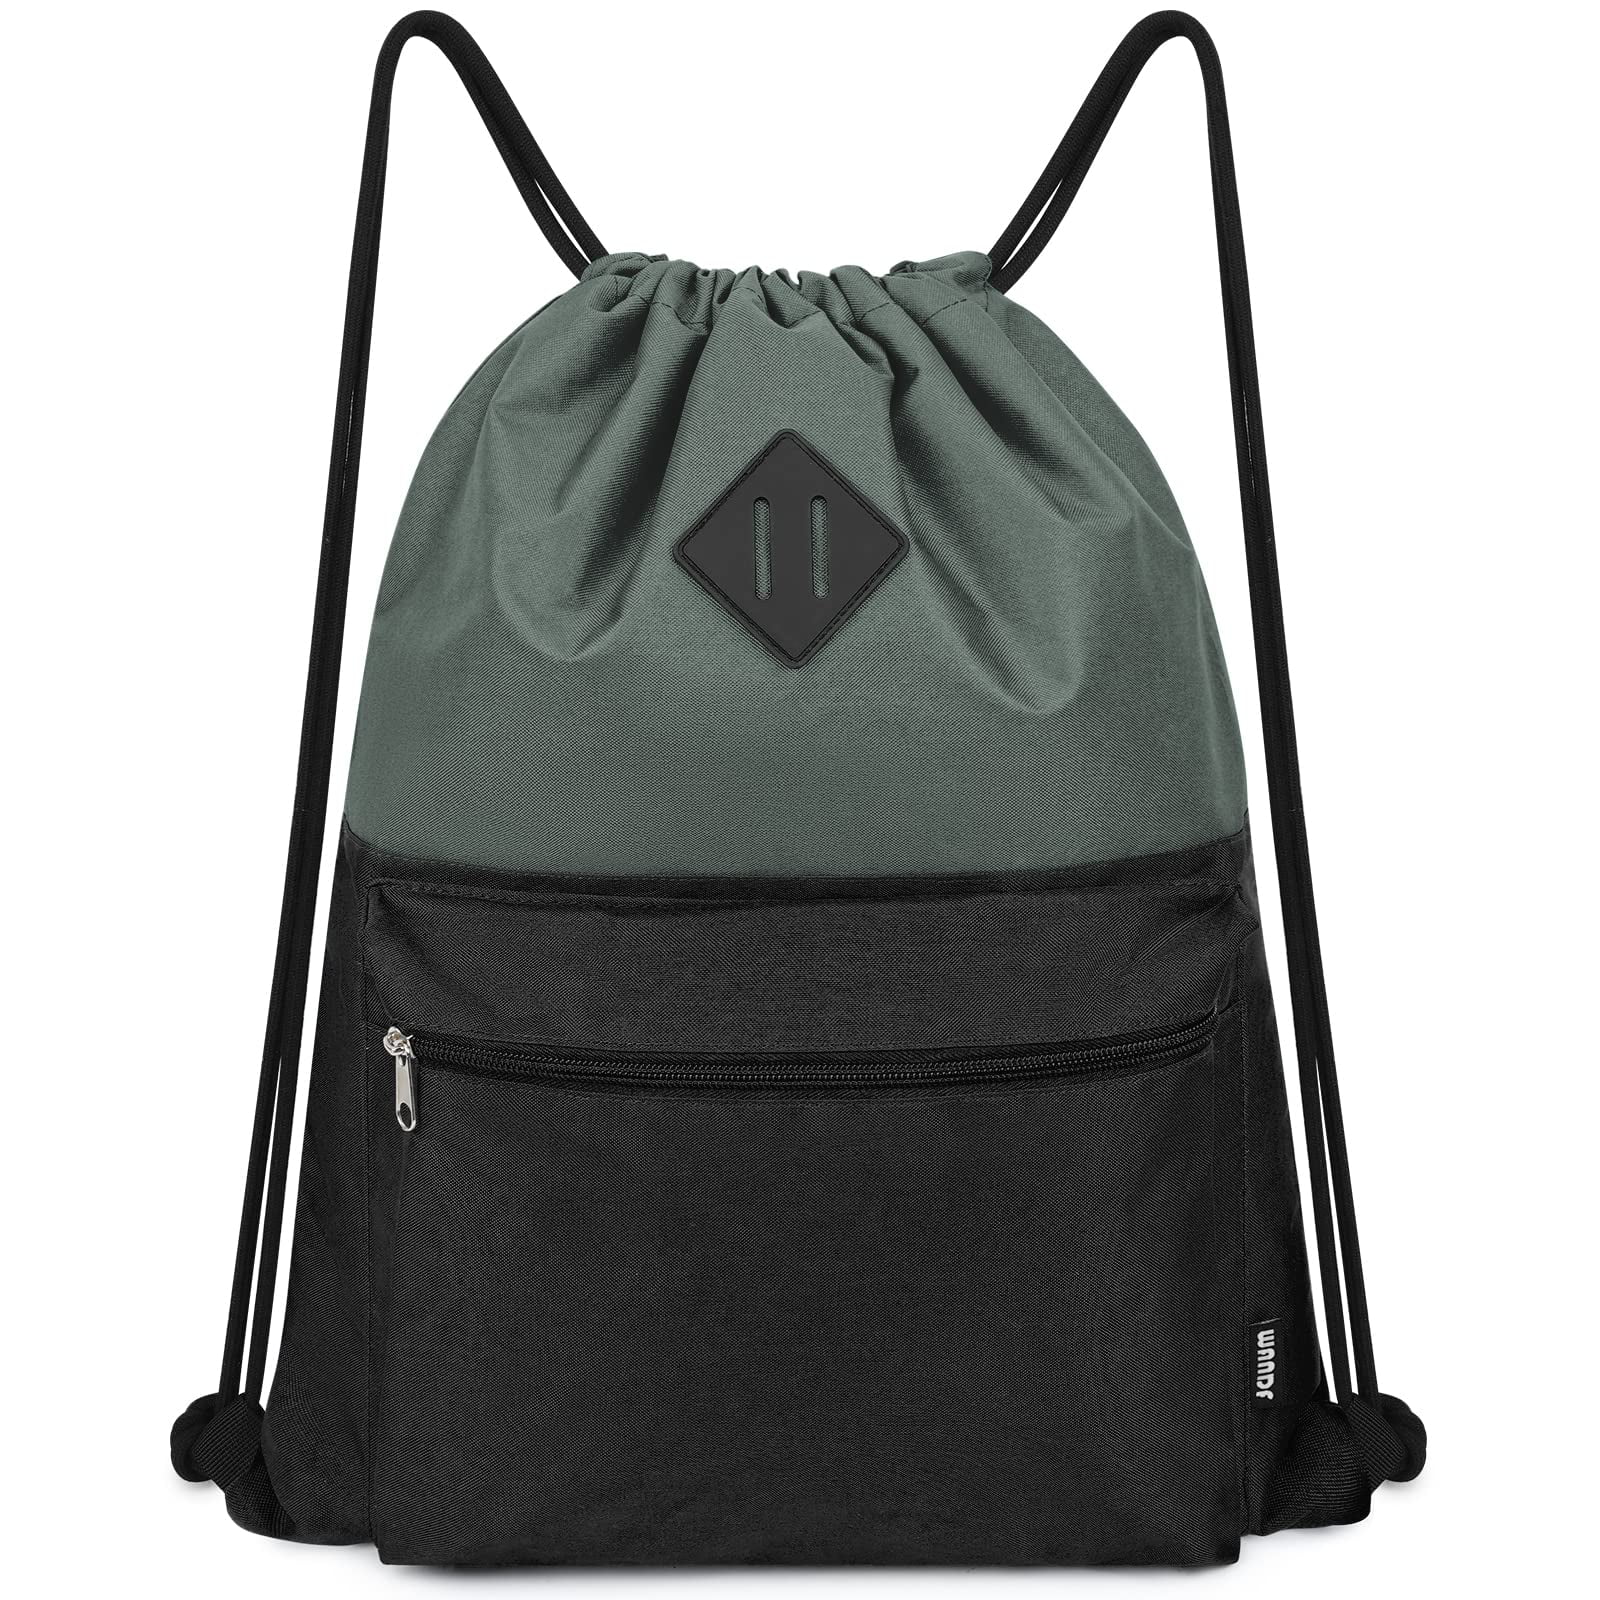 WANDF Drawstring Backpack Sports Gym Bag with Wet Compartment, Water ...